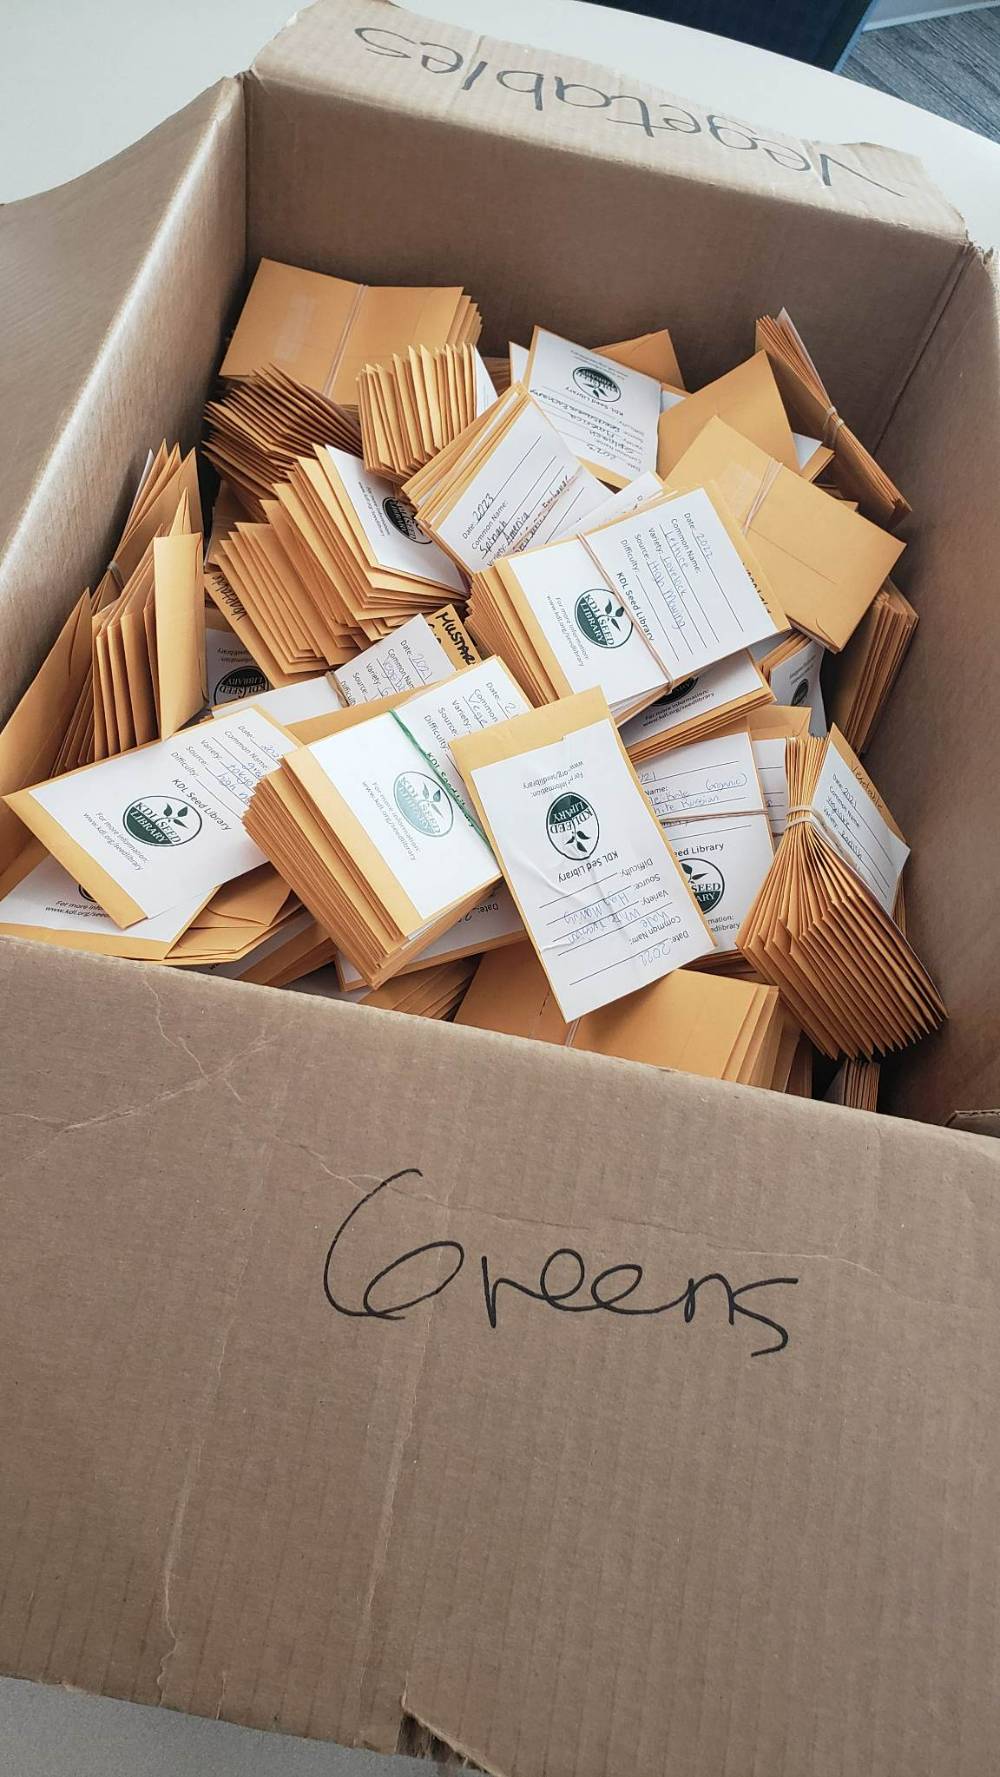 Another box of seed packets